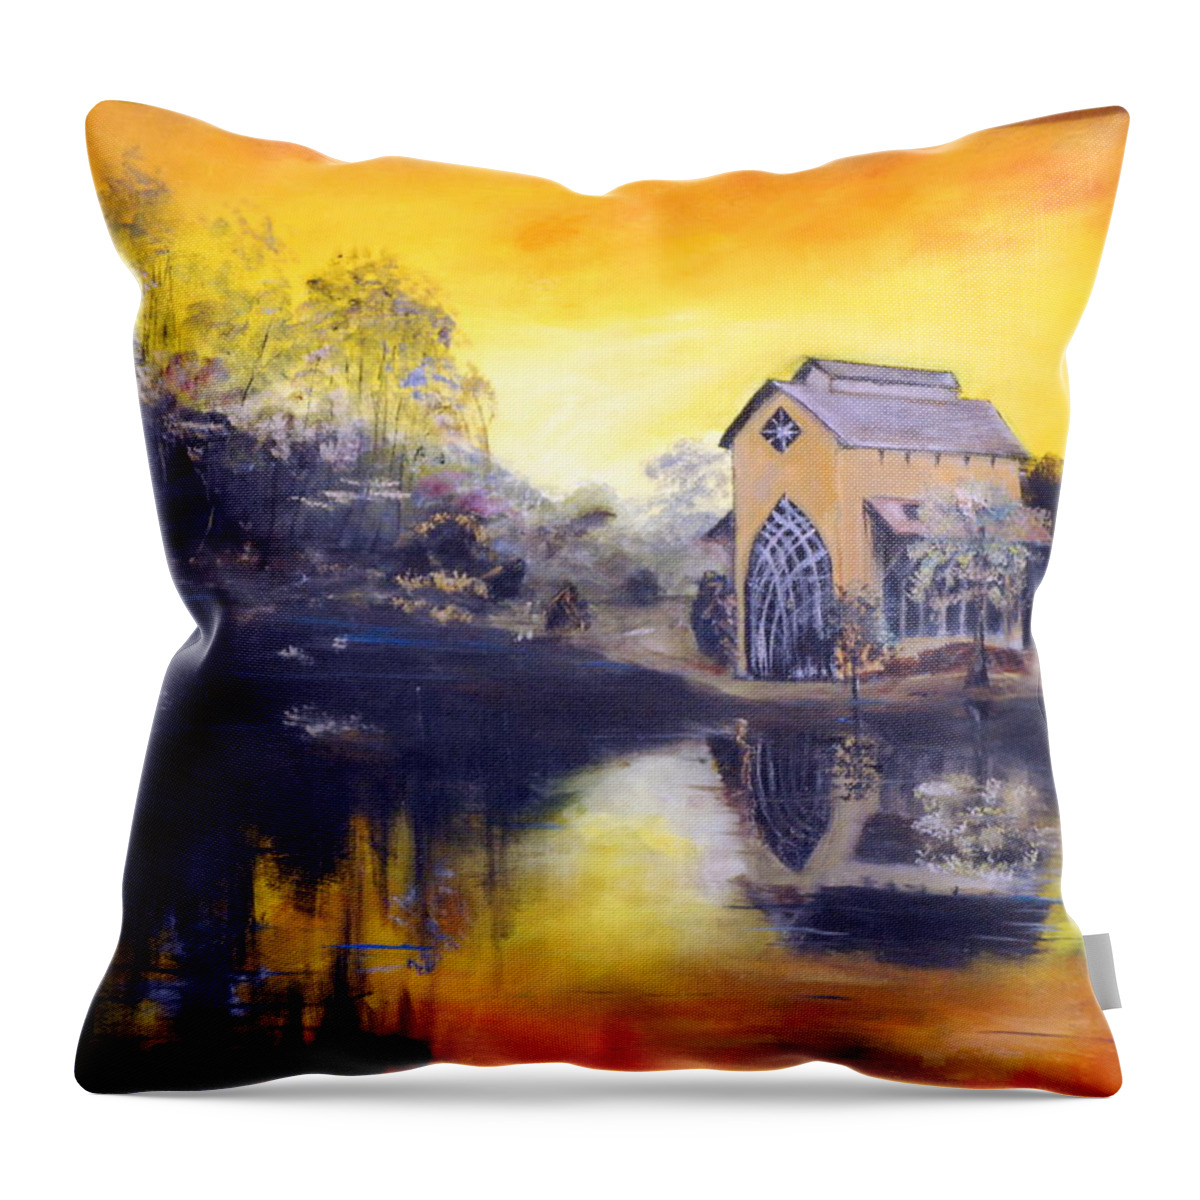 Sunrise Throw Pillow featuring the painting Sunrise by Phil Burton